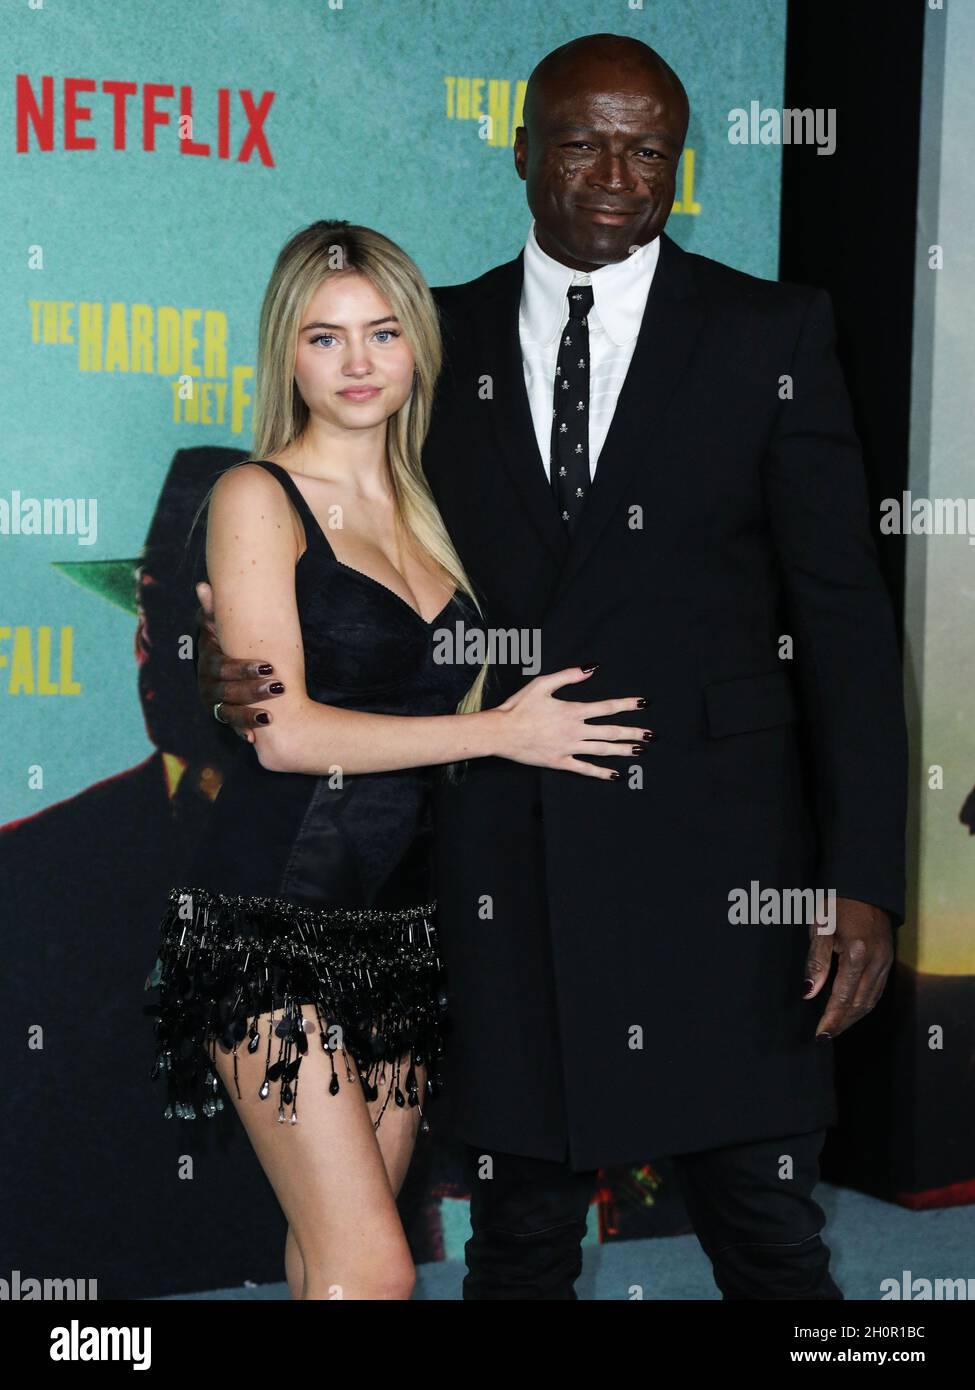 LOS ANGELES, CALIFORNIA, USA - OCTOBER 13: Model Leni Olumi Klum and singer-songwriter Seal (Henry Olusegun Adeola Samuel) arrive at the Los Angeles Premiere Of Netflix's 'The Harder They Fall' held at the Shrine Auditorium and Expo Hall on October 13, 2021 in Los Angeles, California, United States. (Photo by Xavier Collin/Image Press Agency) Stock Photo